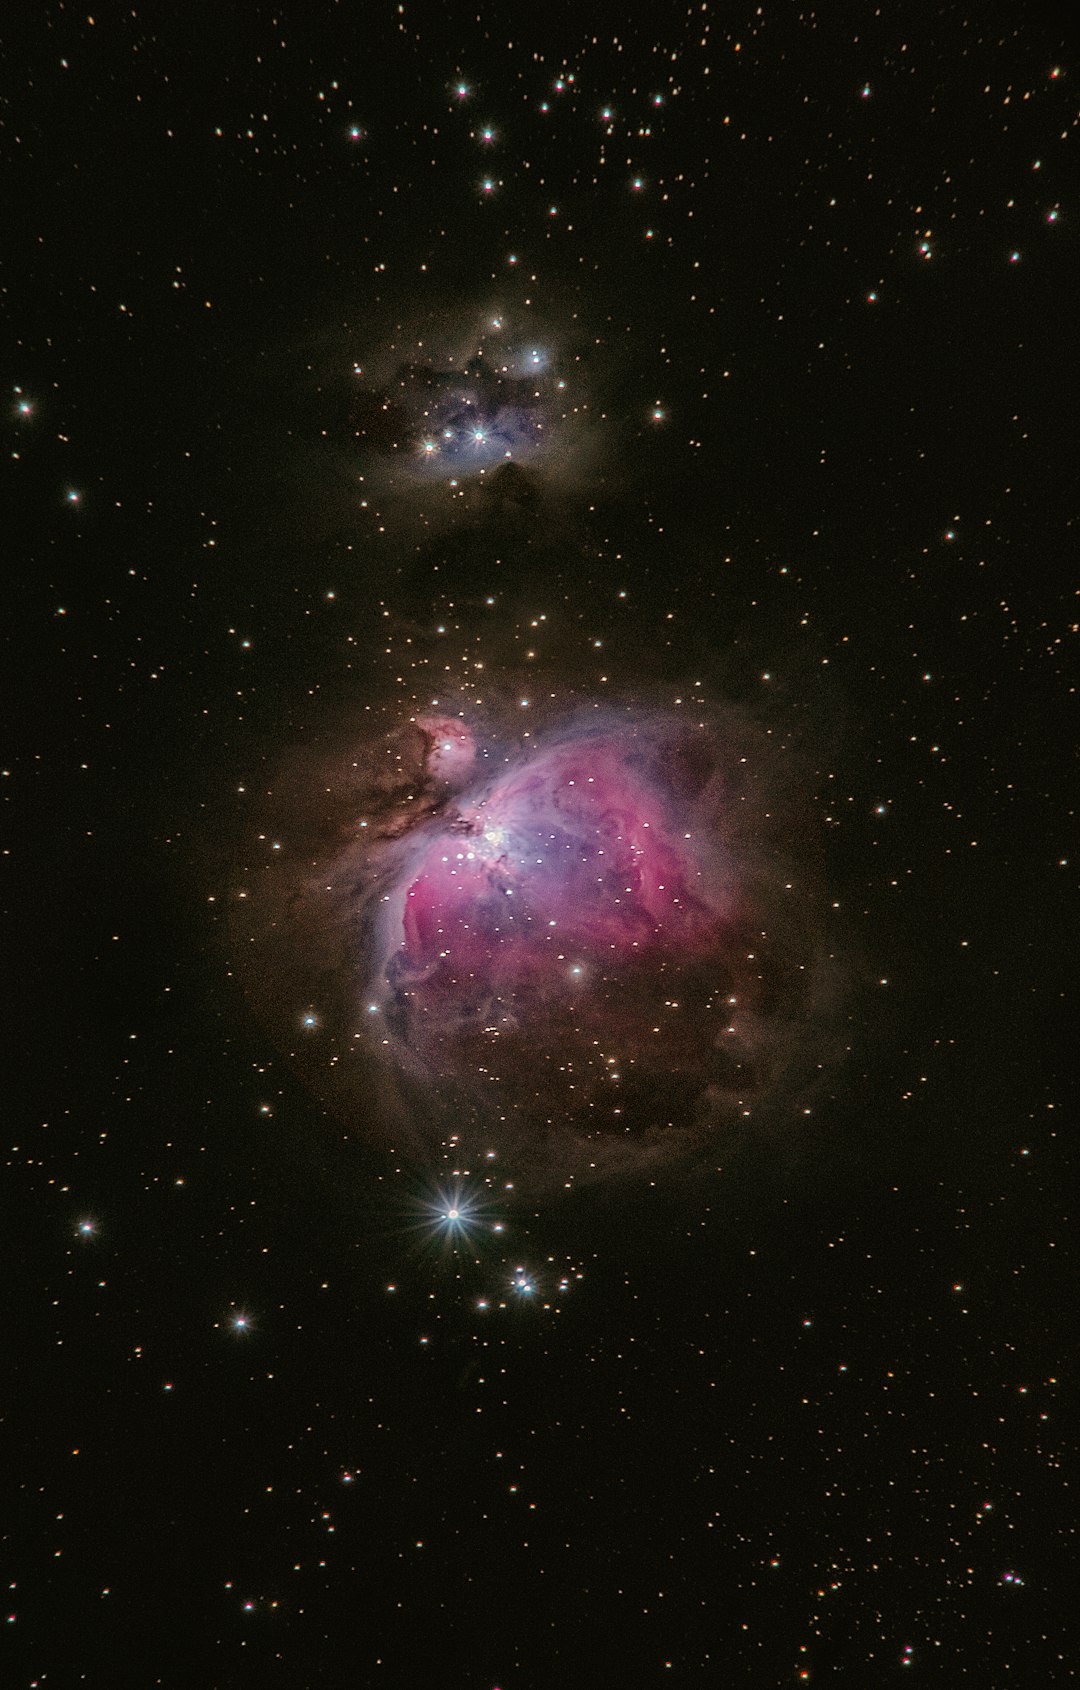 A deep space photo of the nebula in an analog style, featuring a theorized nebula with sharp details and vibrant colors, with a double exposure of the M42 Orion constellation and its reflection on a black background. The photo was taken with a Canon EOS R5 camera with a Nikon AF-S T TV lens at an f/8 aperture setting and ISO 600 for best image quality in the style of an unnamed artist. –ar 81:128